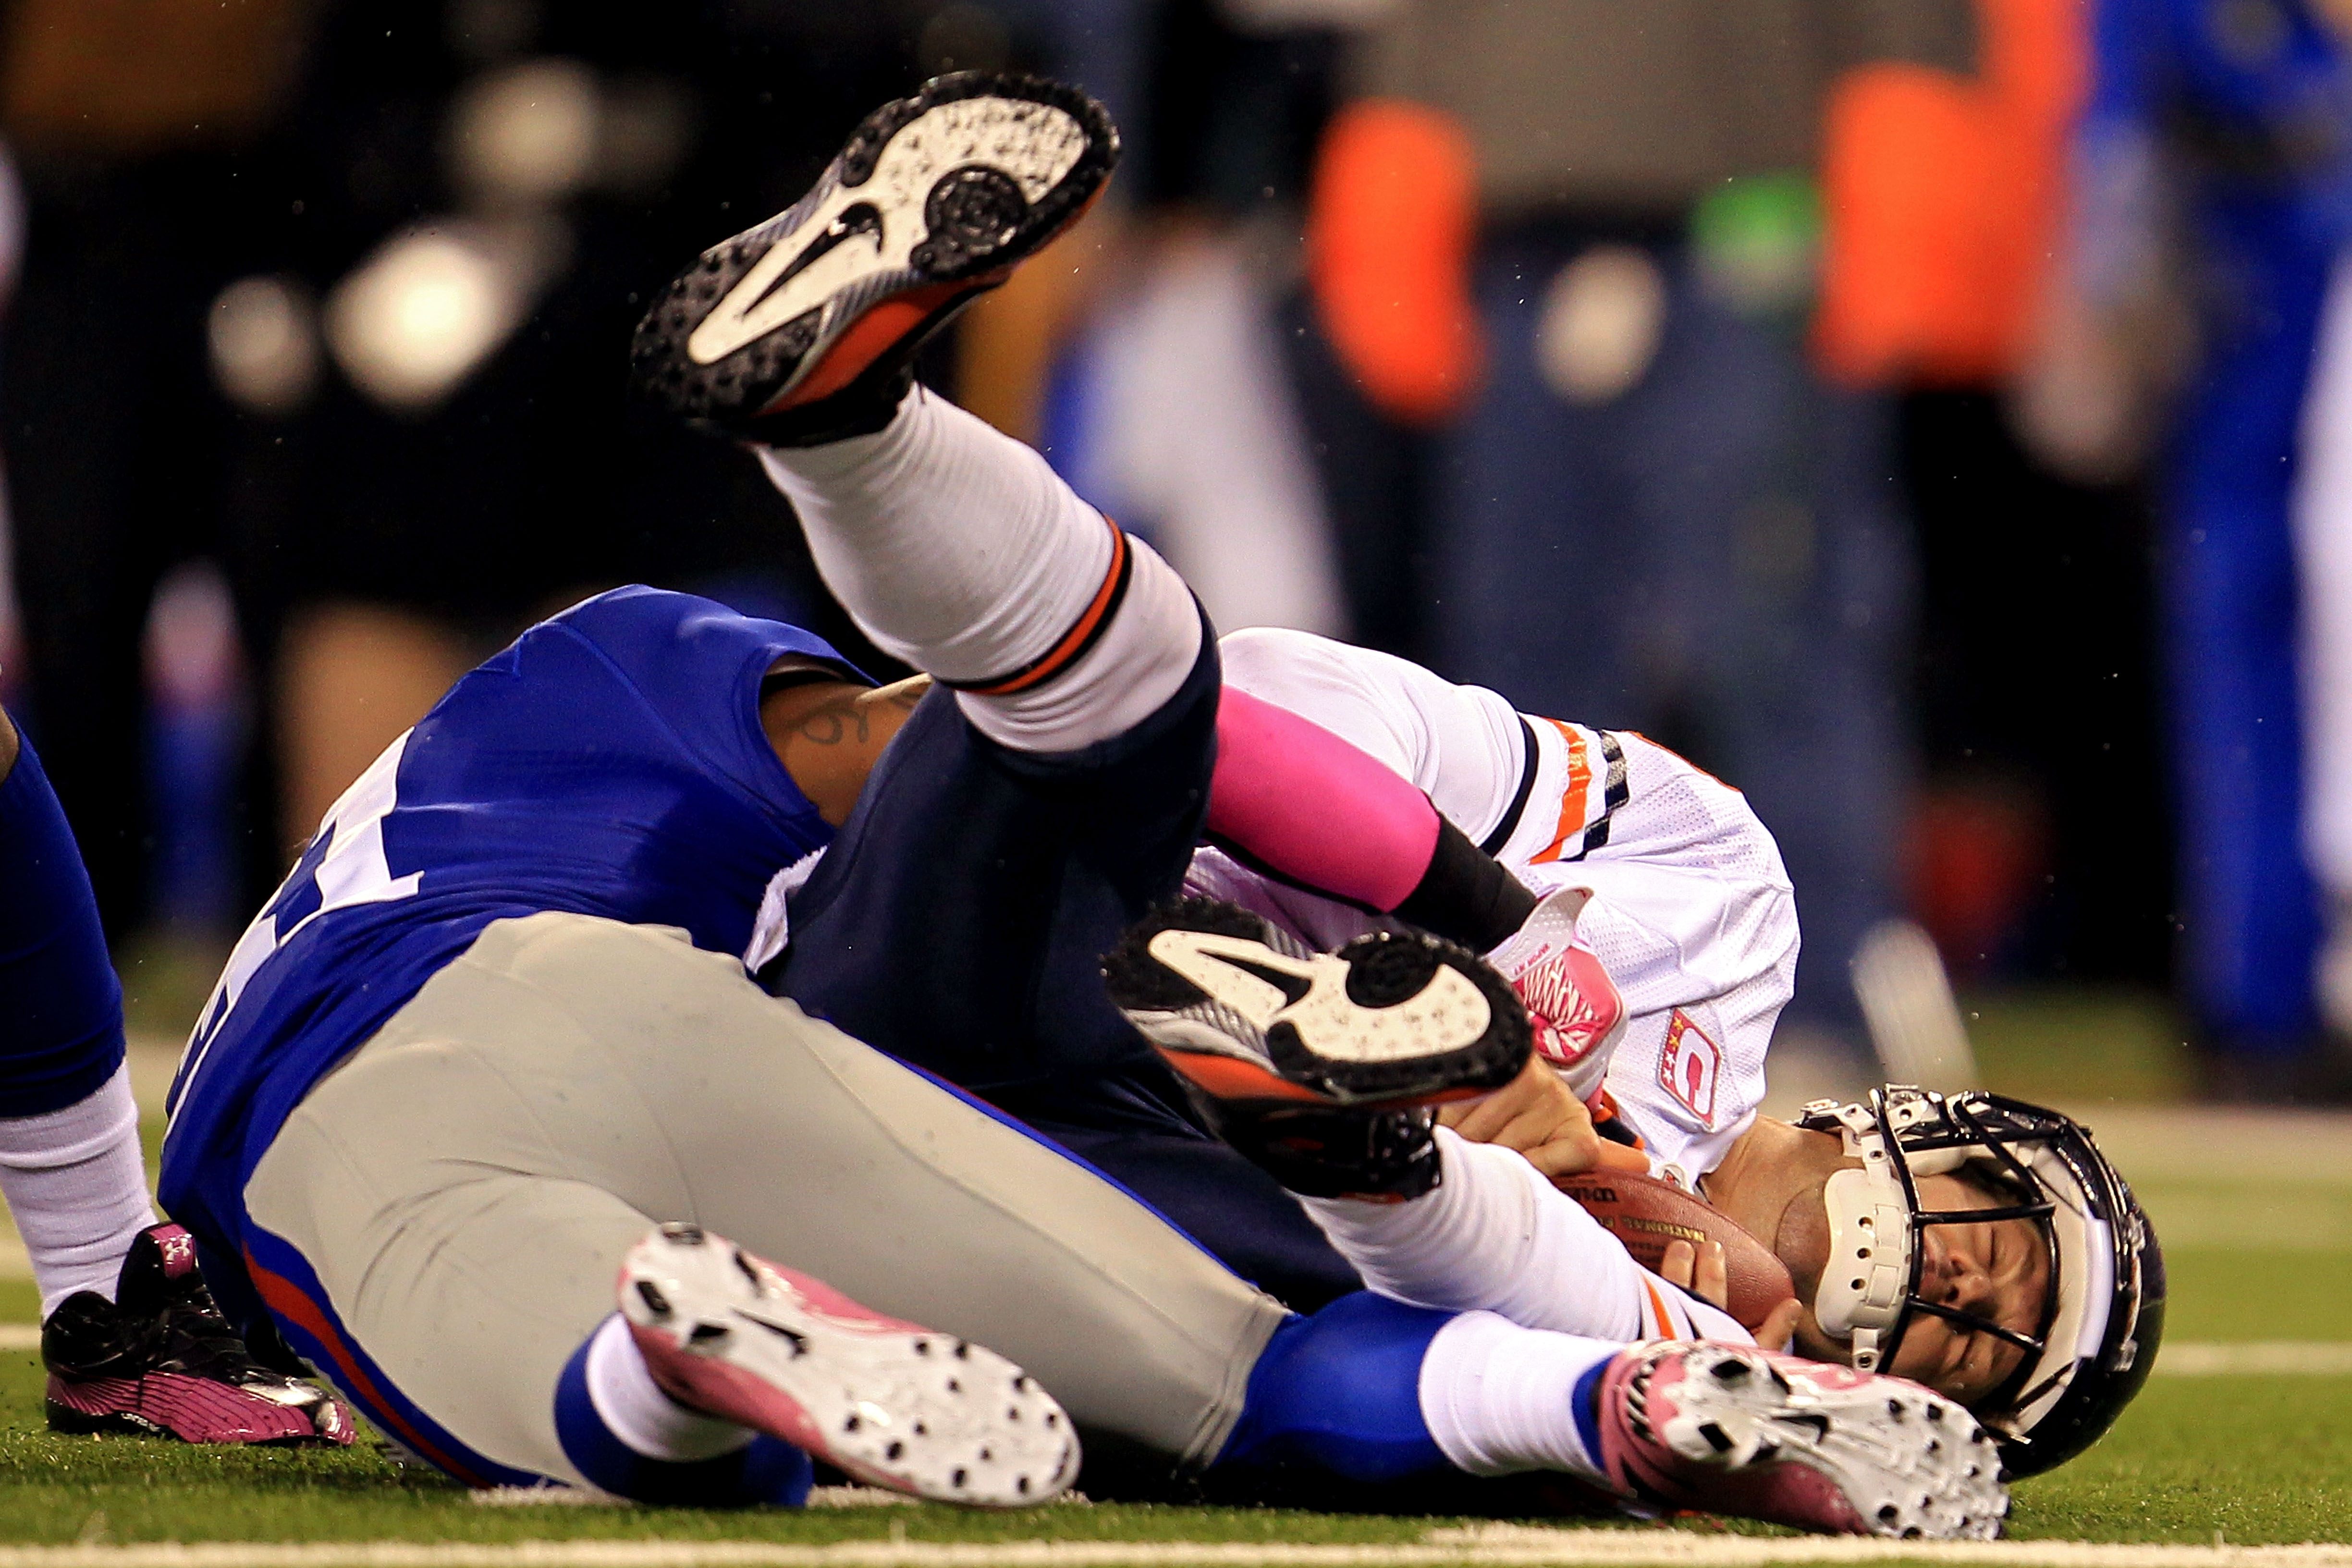 EAST RUTHERFORD, NJ - OCTOBER 03:  Aaron Ross #31 of the New York Giants sacks Jay Cutler #6 of the Chicago Bears at New Meadowlands Stadium on October 3, 2010 in East Rutherford, New Jersey.  (Photo by Chris McGrath/Getty Images)